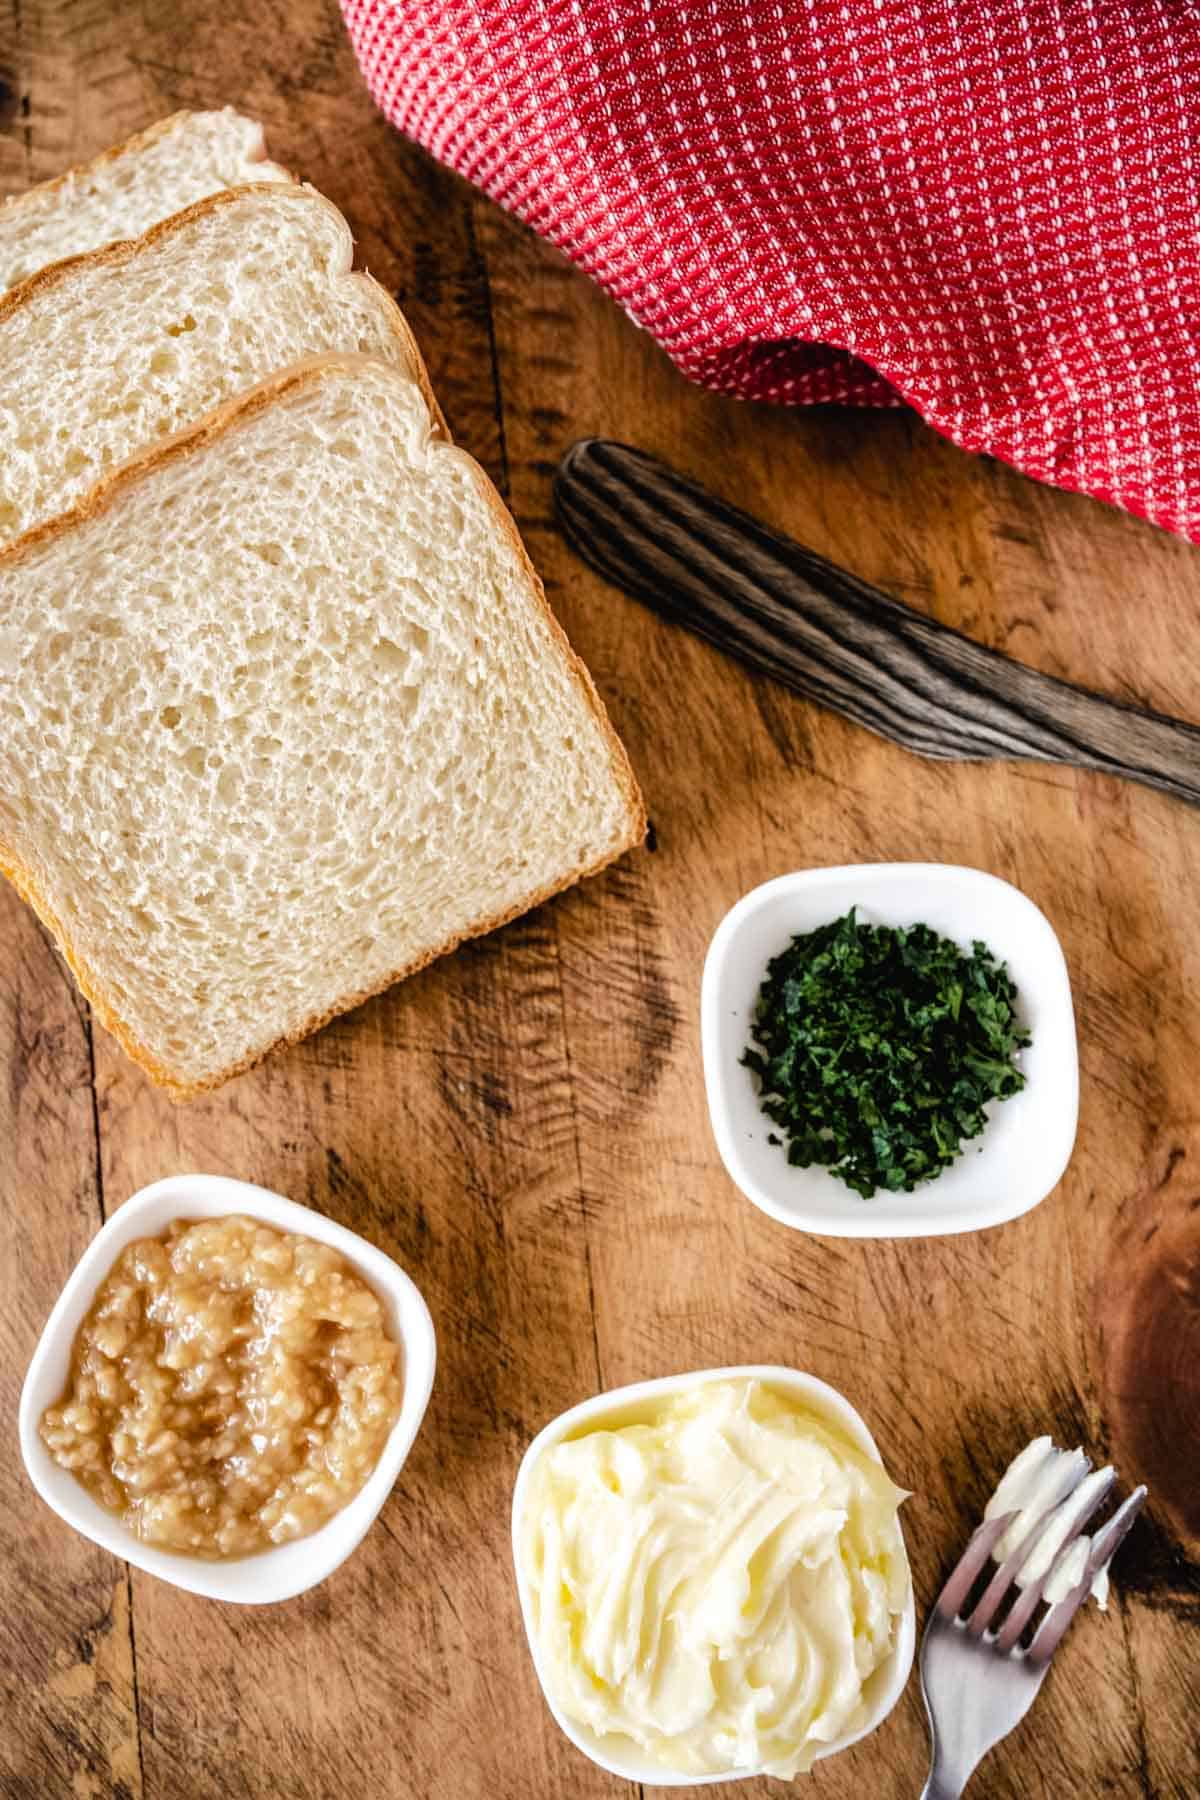 A wooden board filled with ingredients to make air fryer texas toast - thick sliced texas toast bread, minced garlic, butter, and chopped parsley.